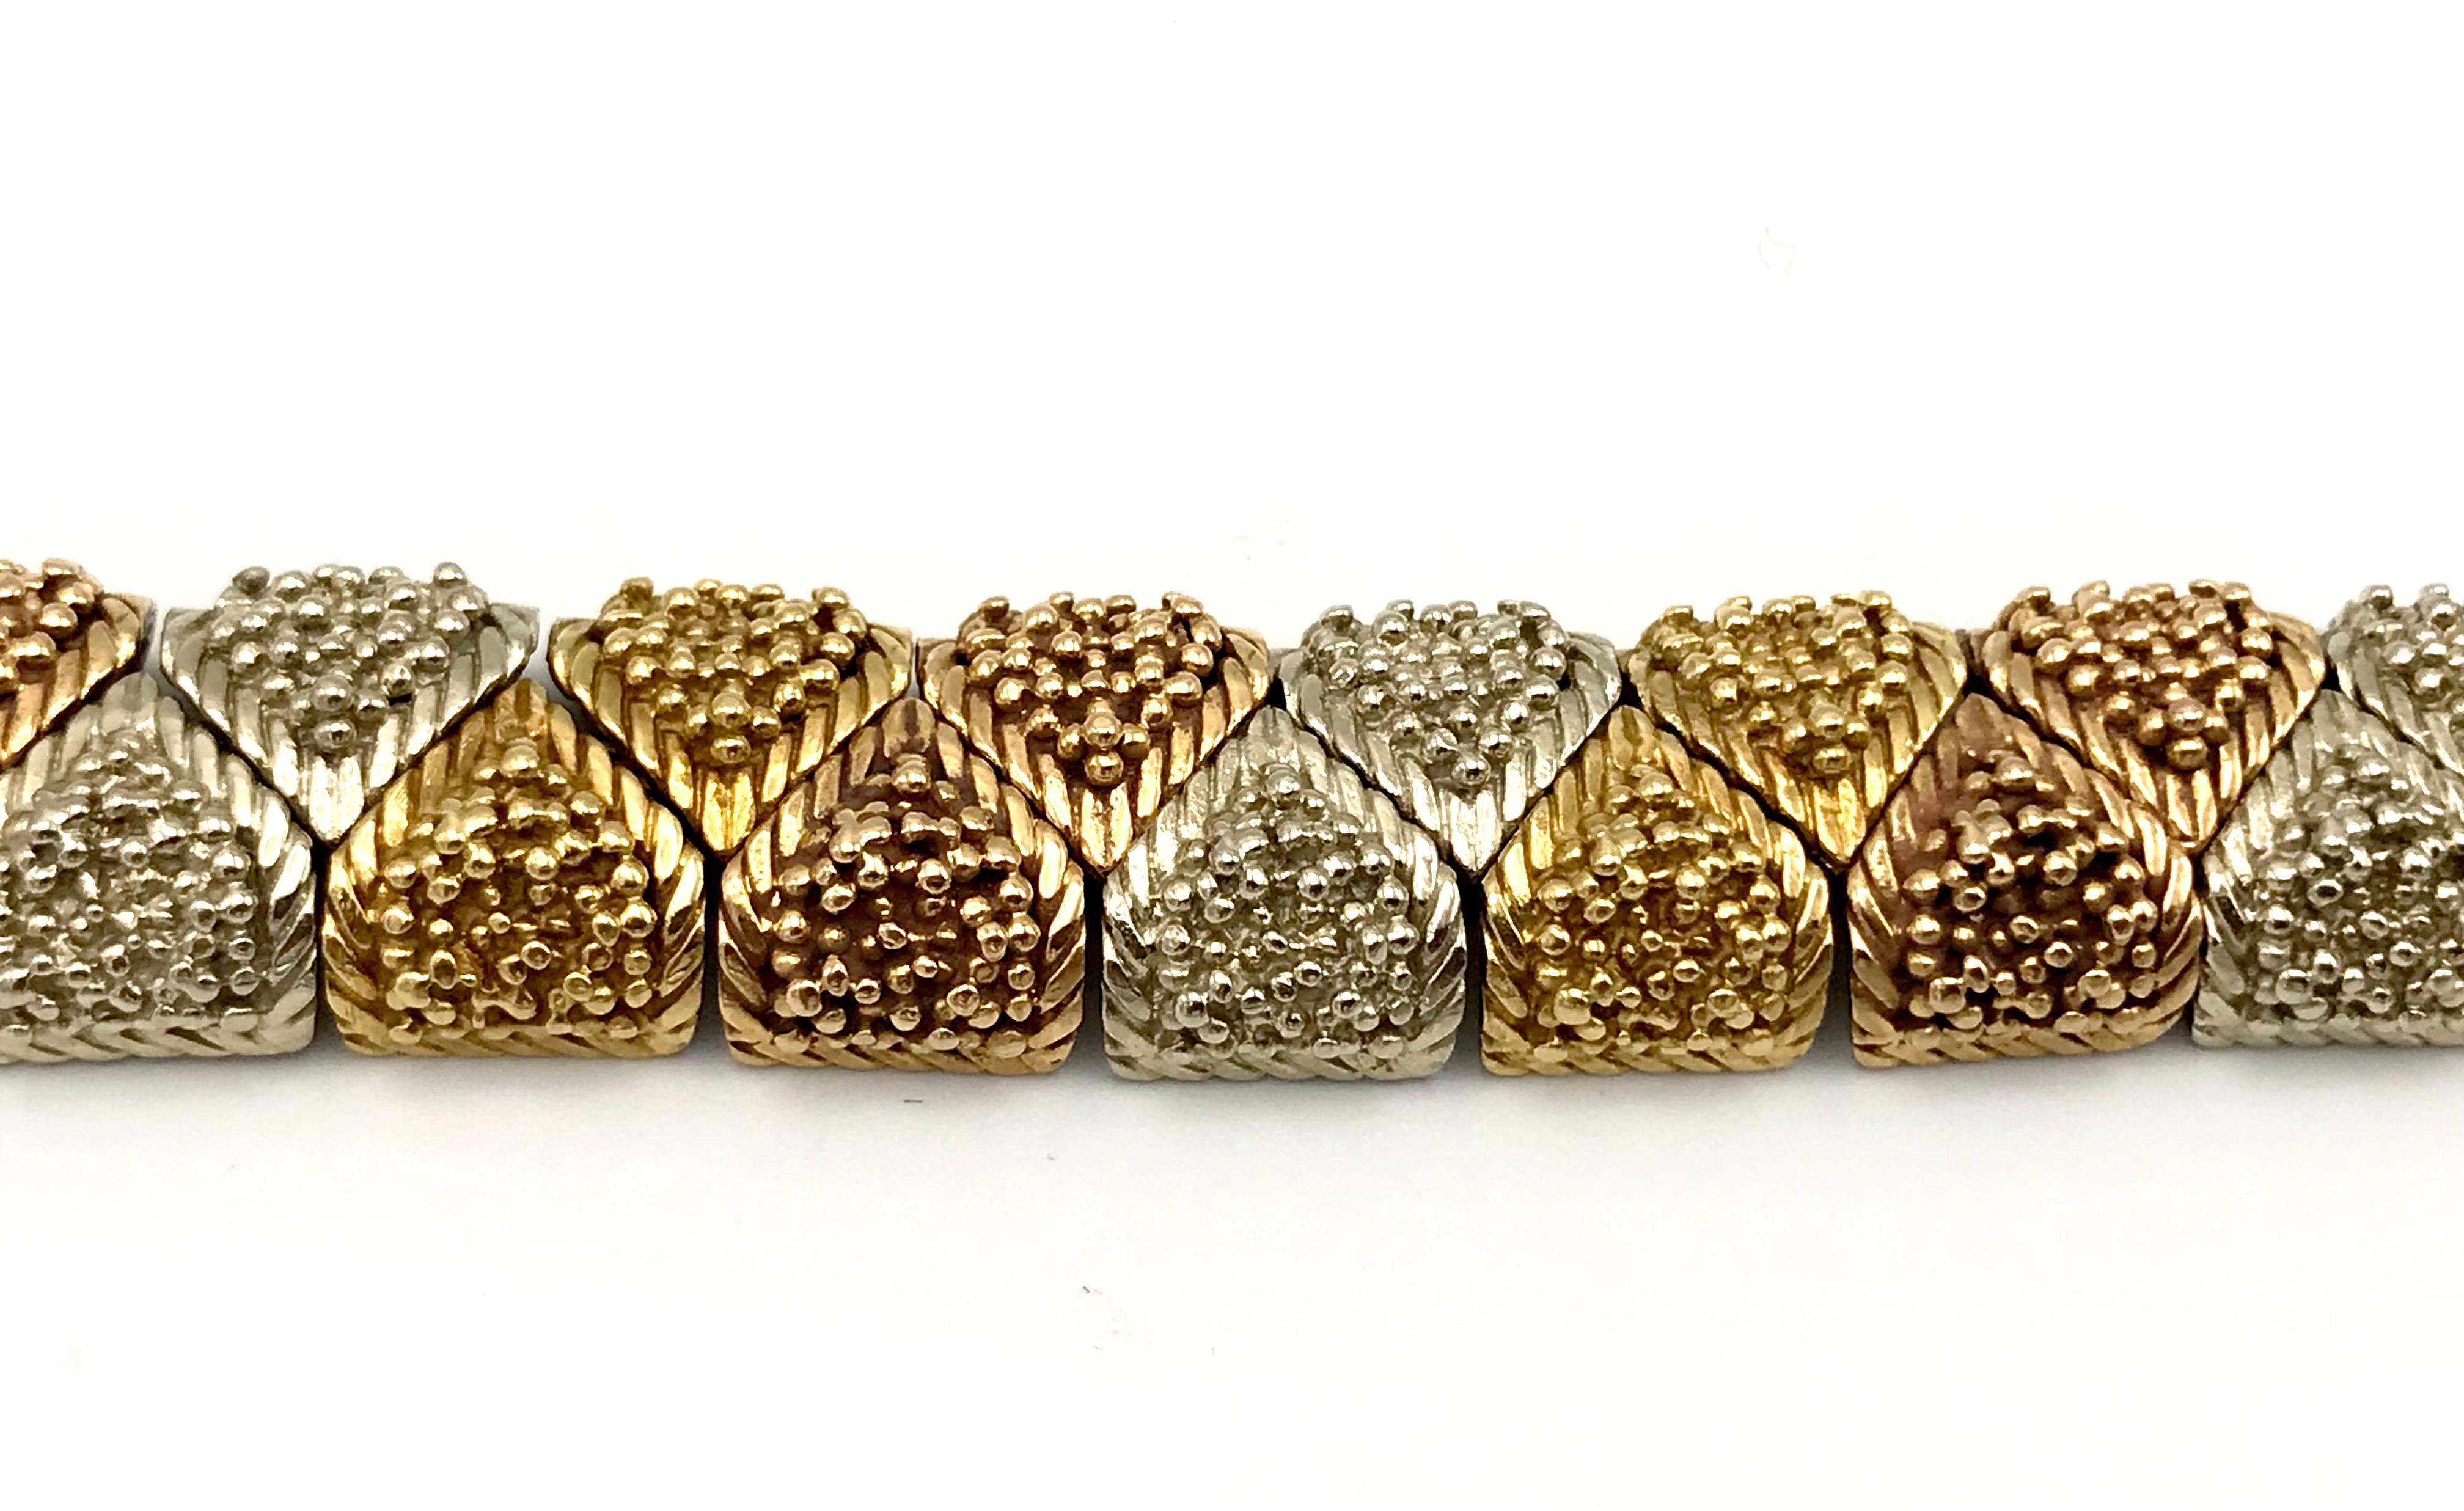 Vintage (c.1970s) Bulgari bracelet made of textured 18k yellow, white and rose gold. Features the connected sections that make the bracelet flexible. Stamped with Bulgari maker's mark and a hallmark for 18k gold.
Measurements: 7.25